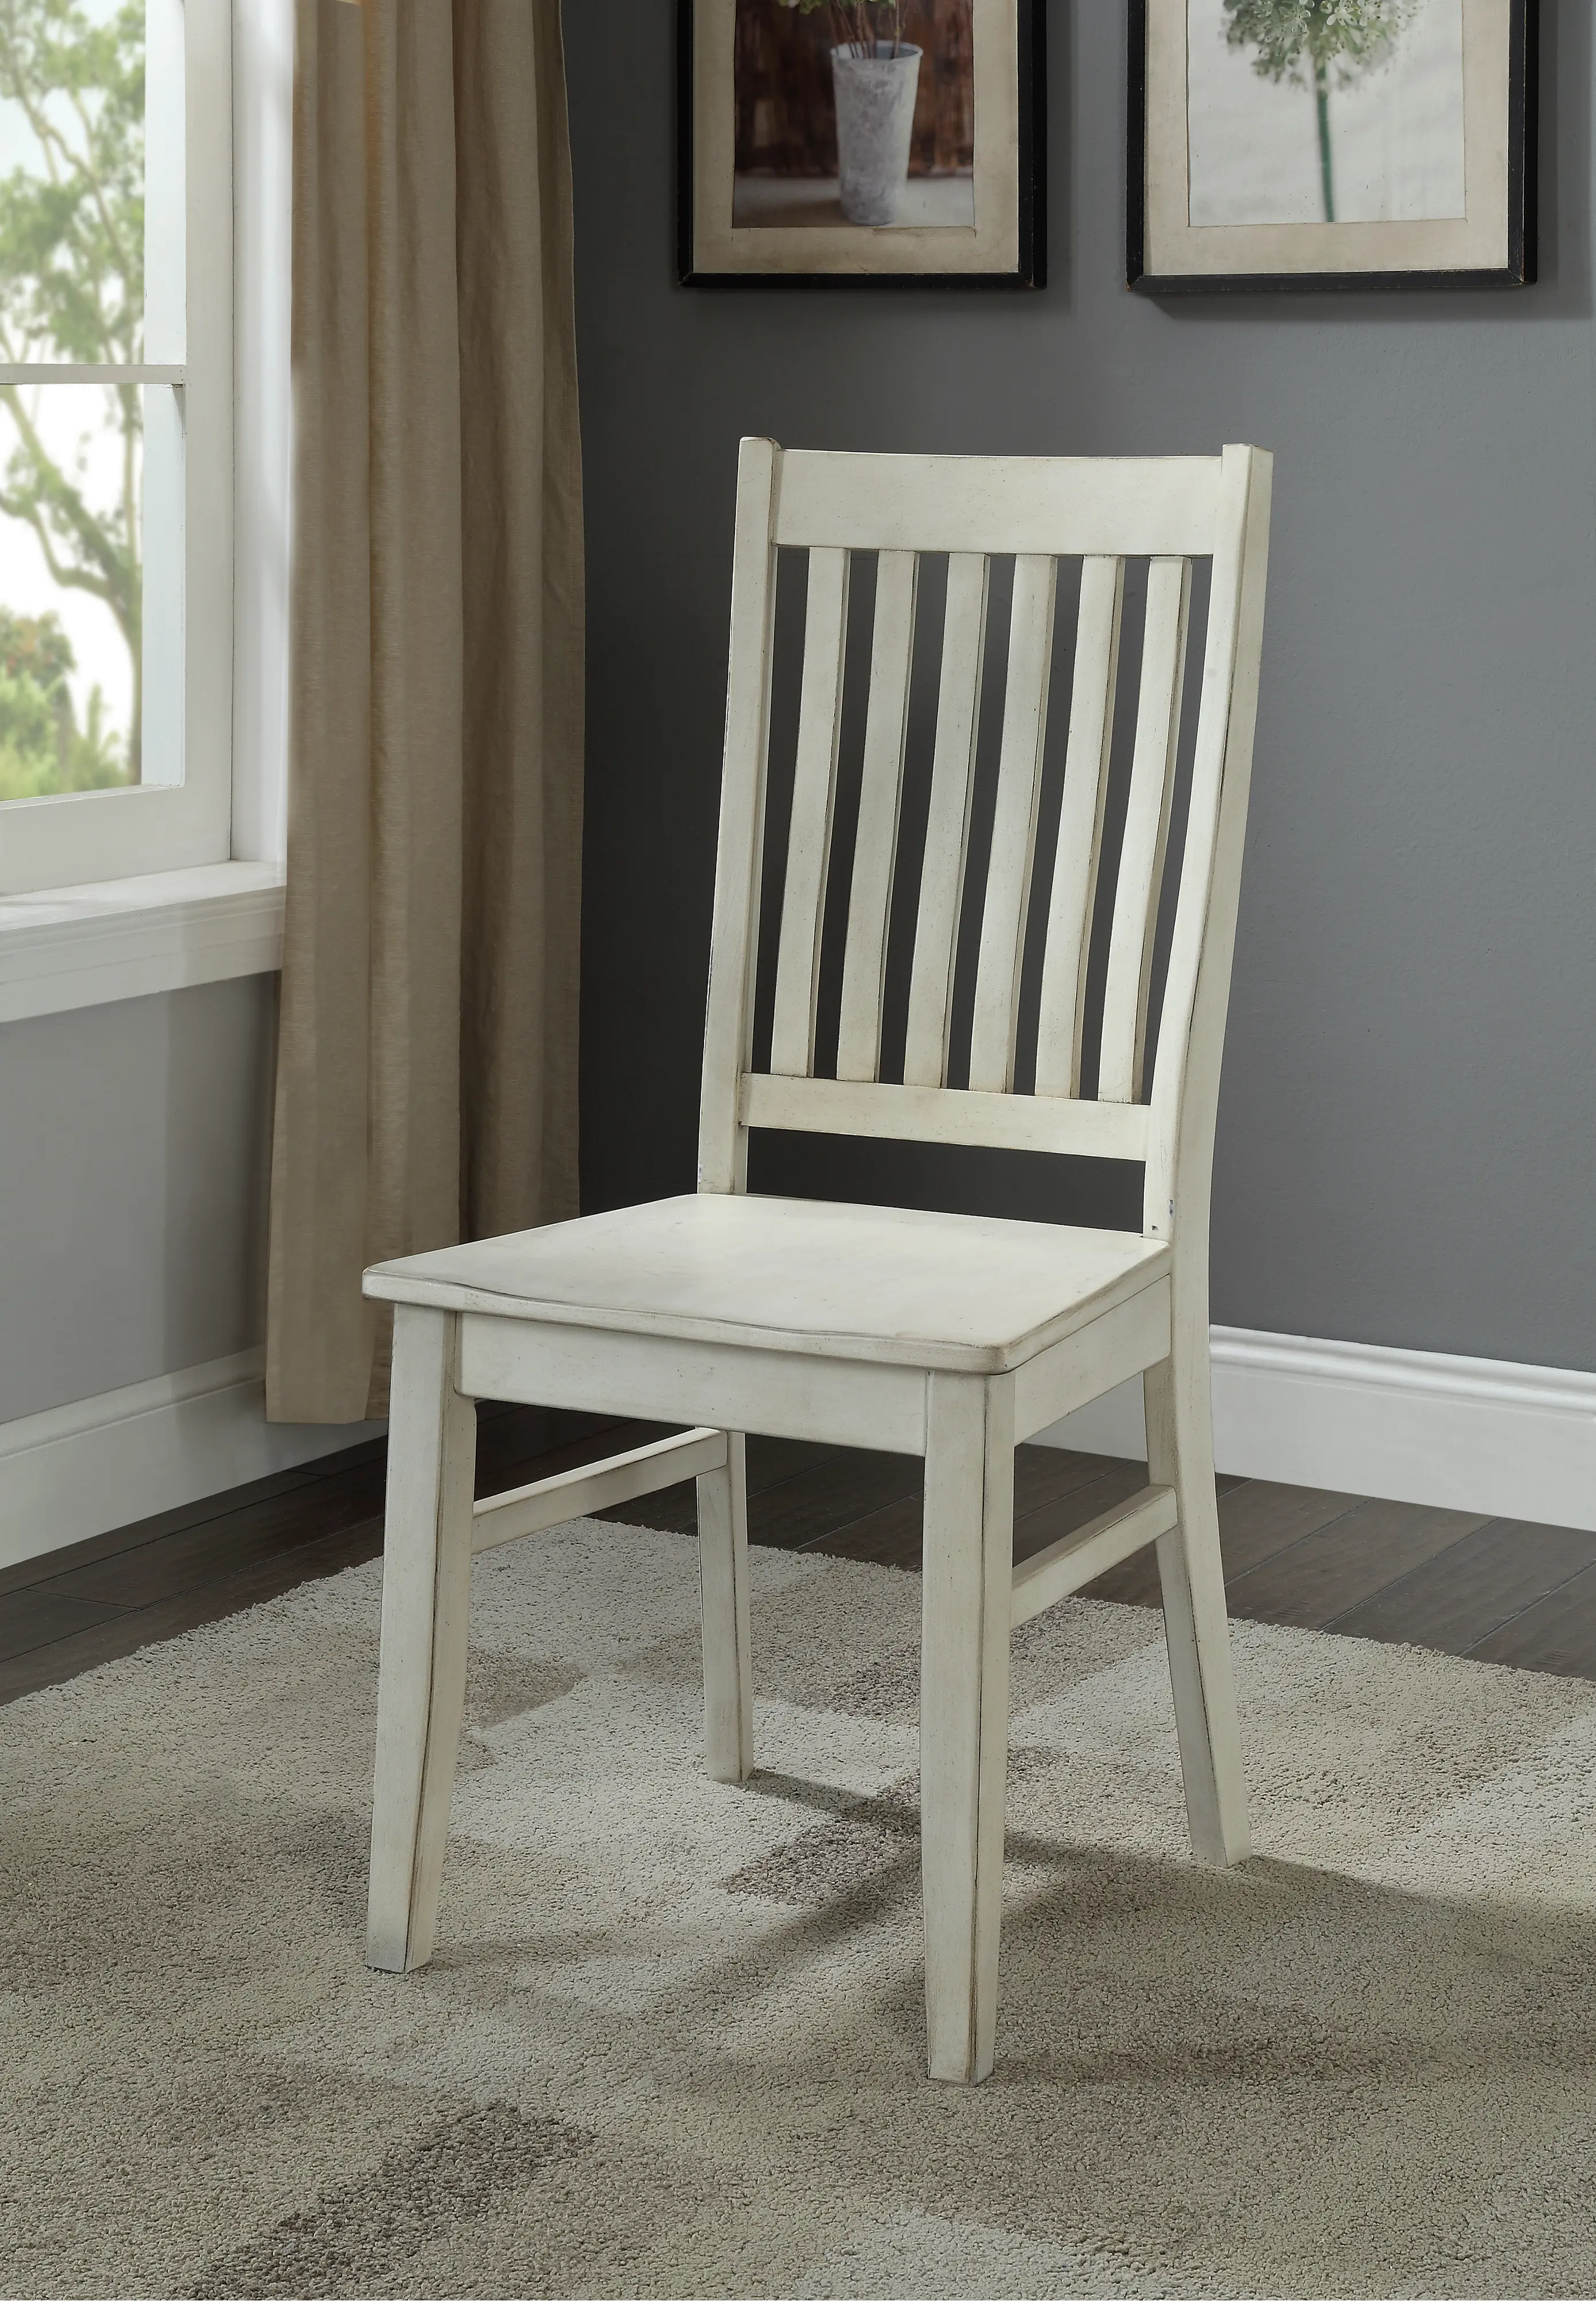 Traditional White Dining Room Chair -Orchard Park